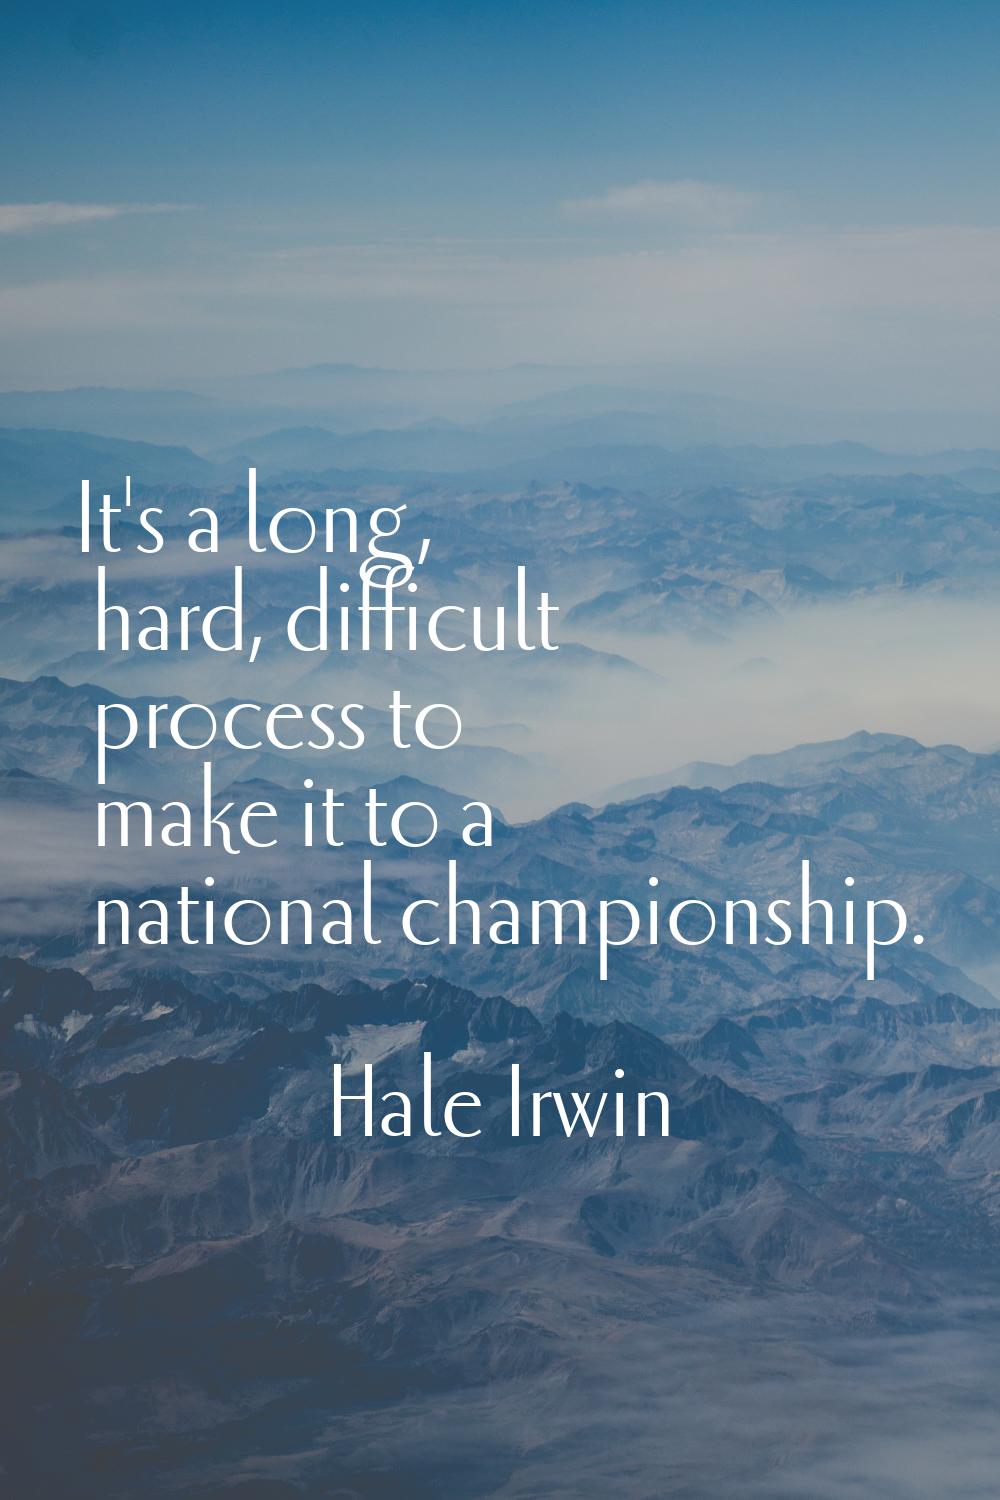 It's a long, hard, difficult process to make it to a national championship.